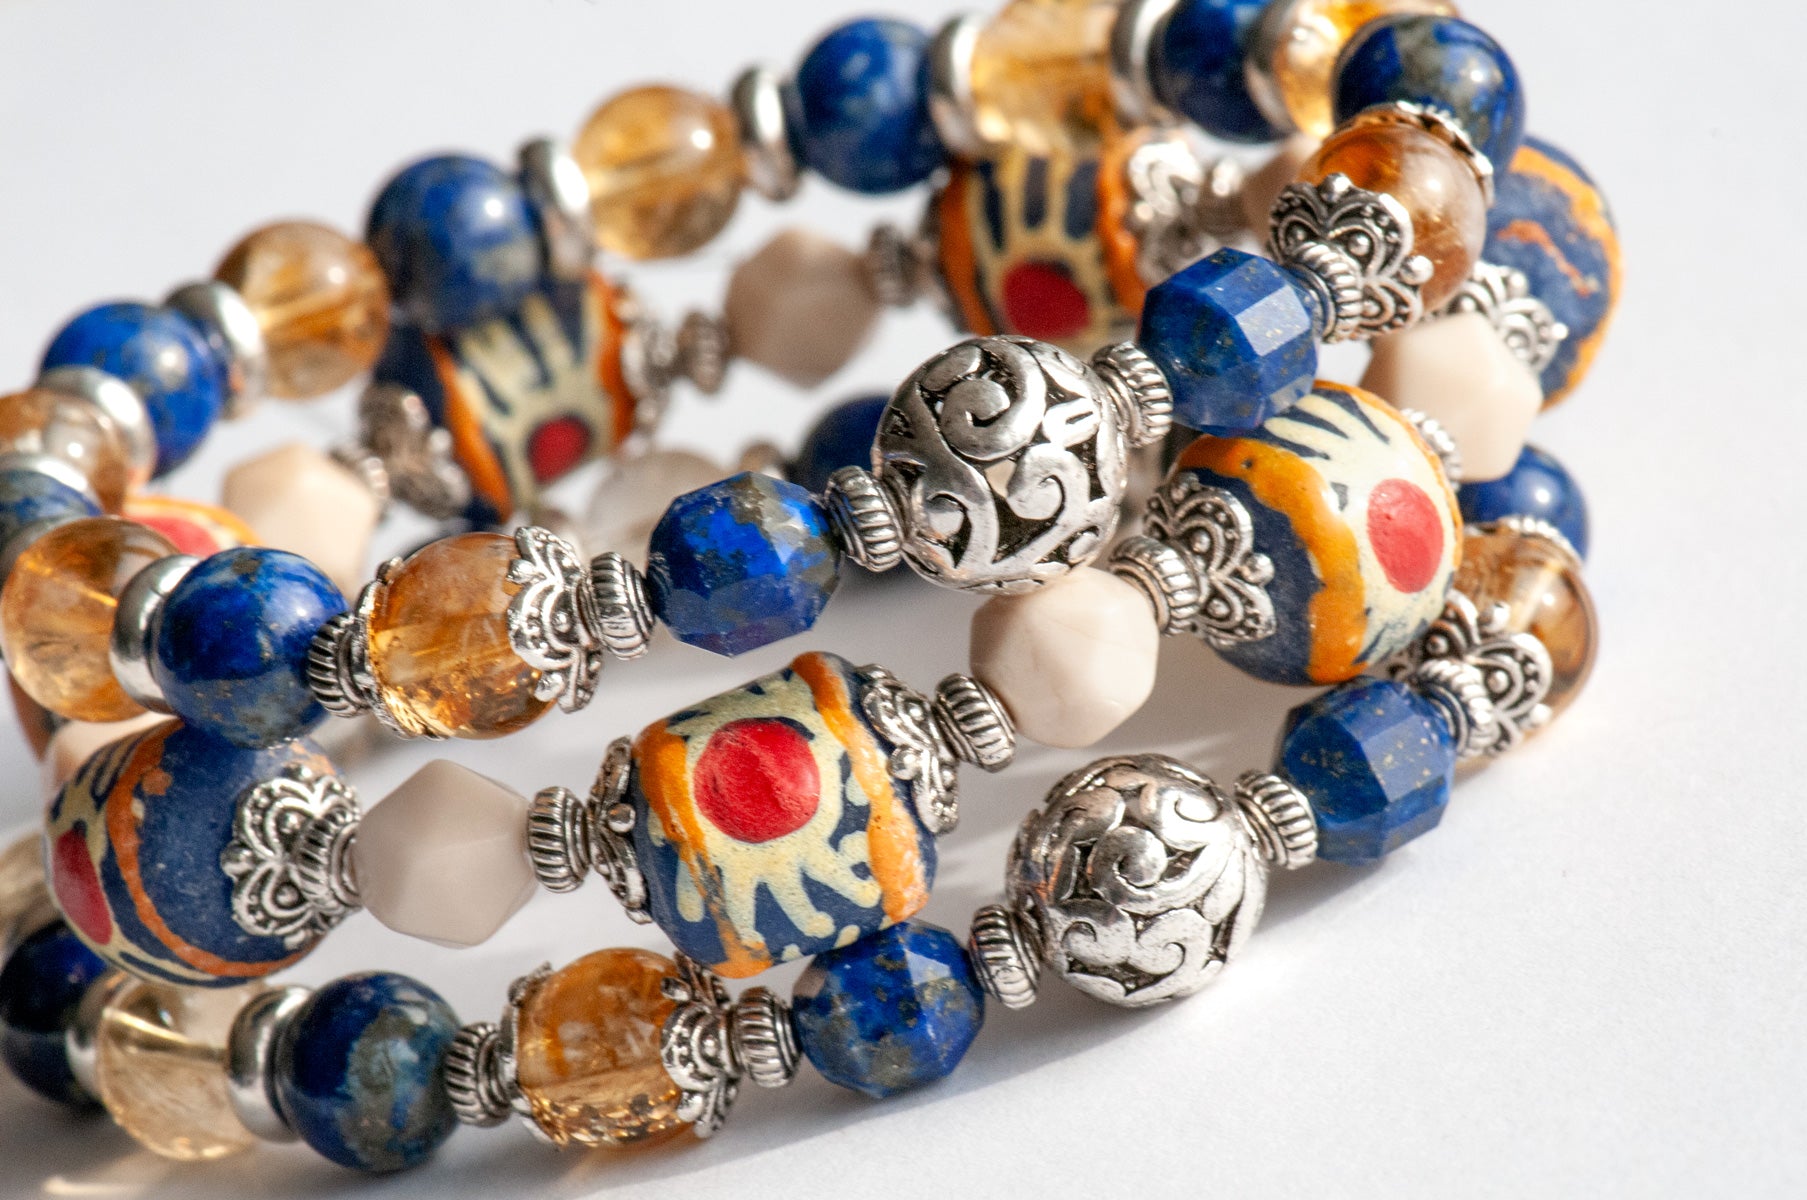 Handmade bracelet set with Citrine, Lapis, and hand-painted beads